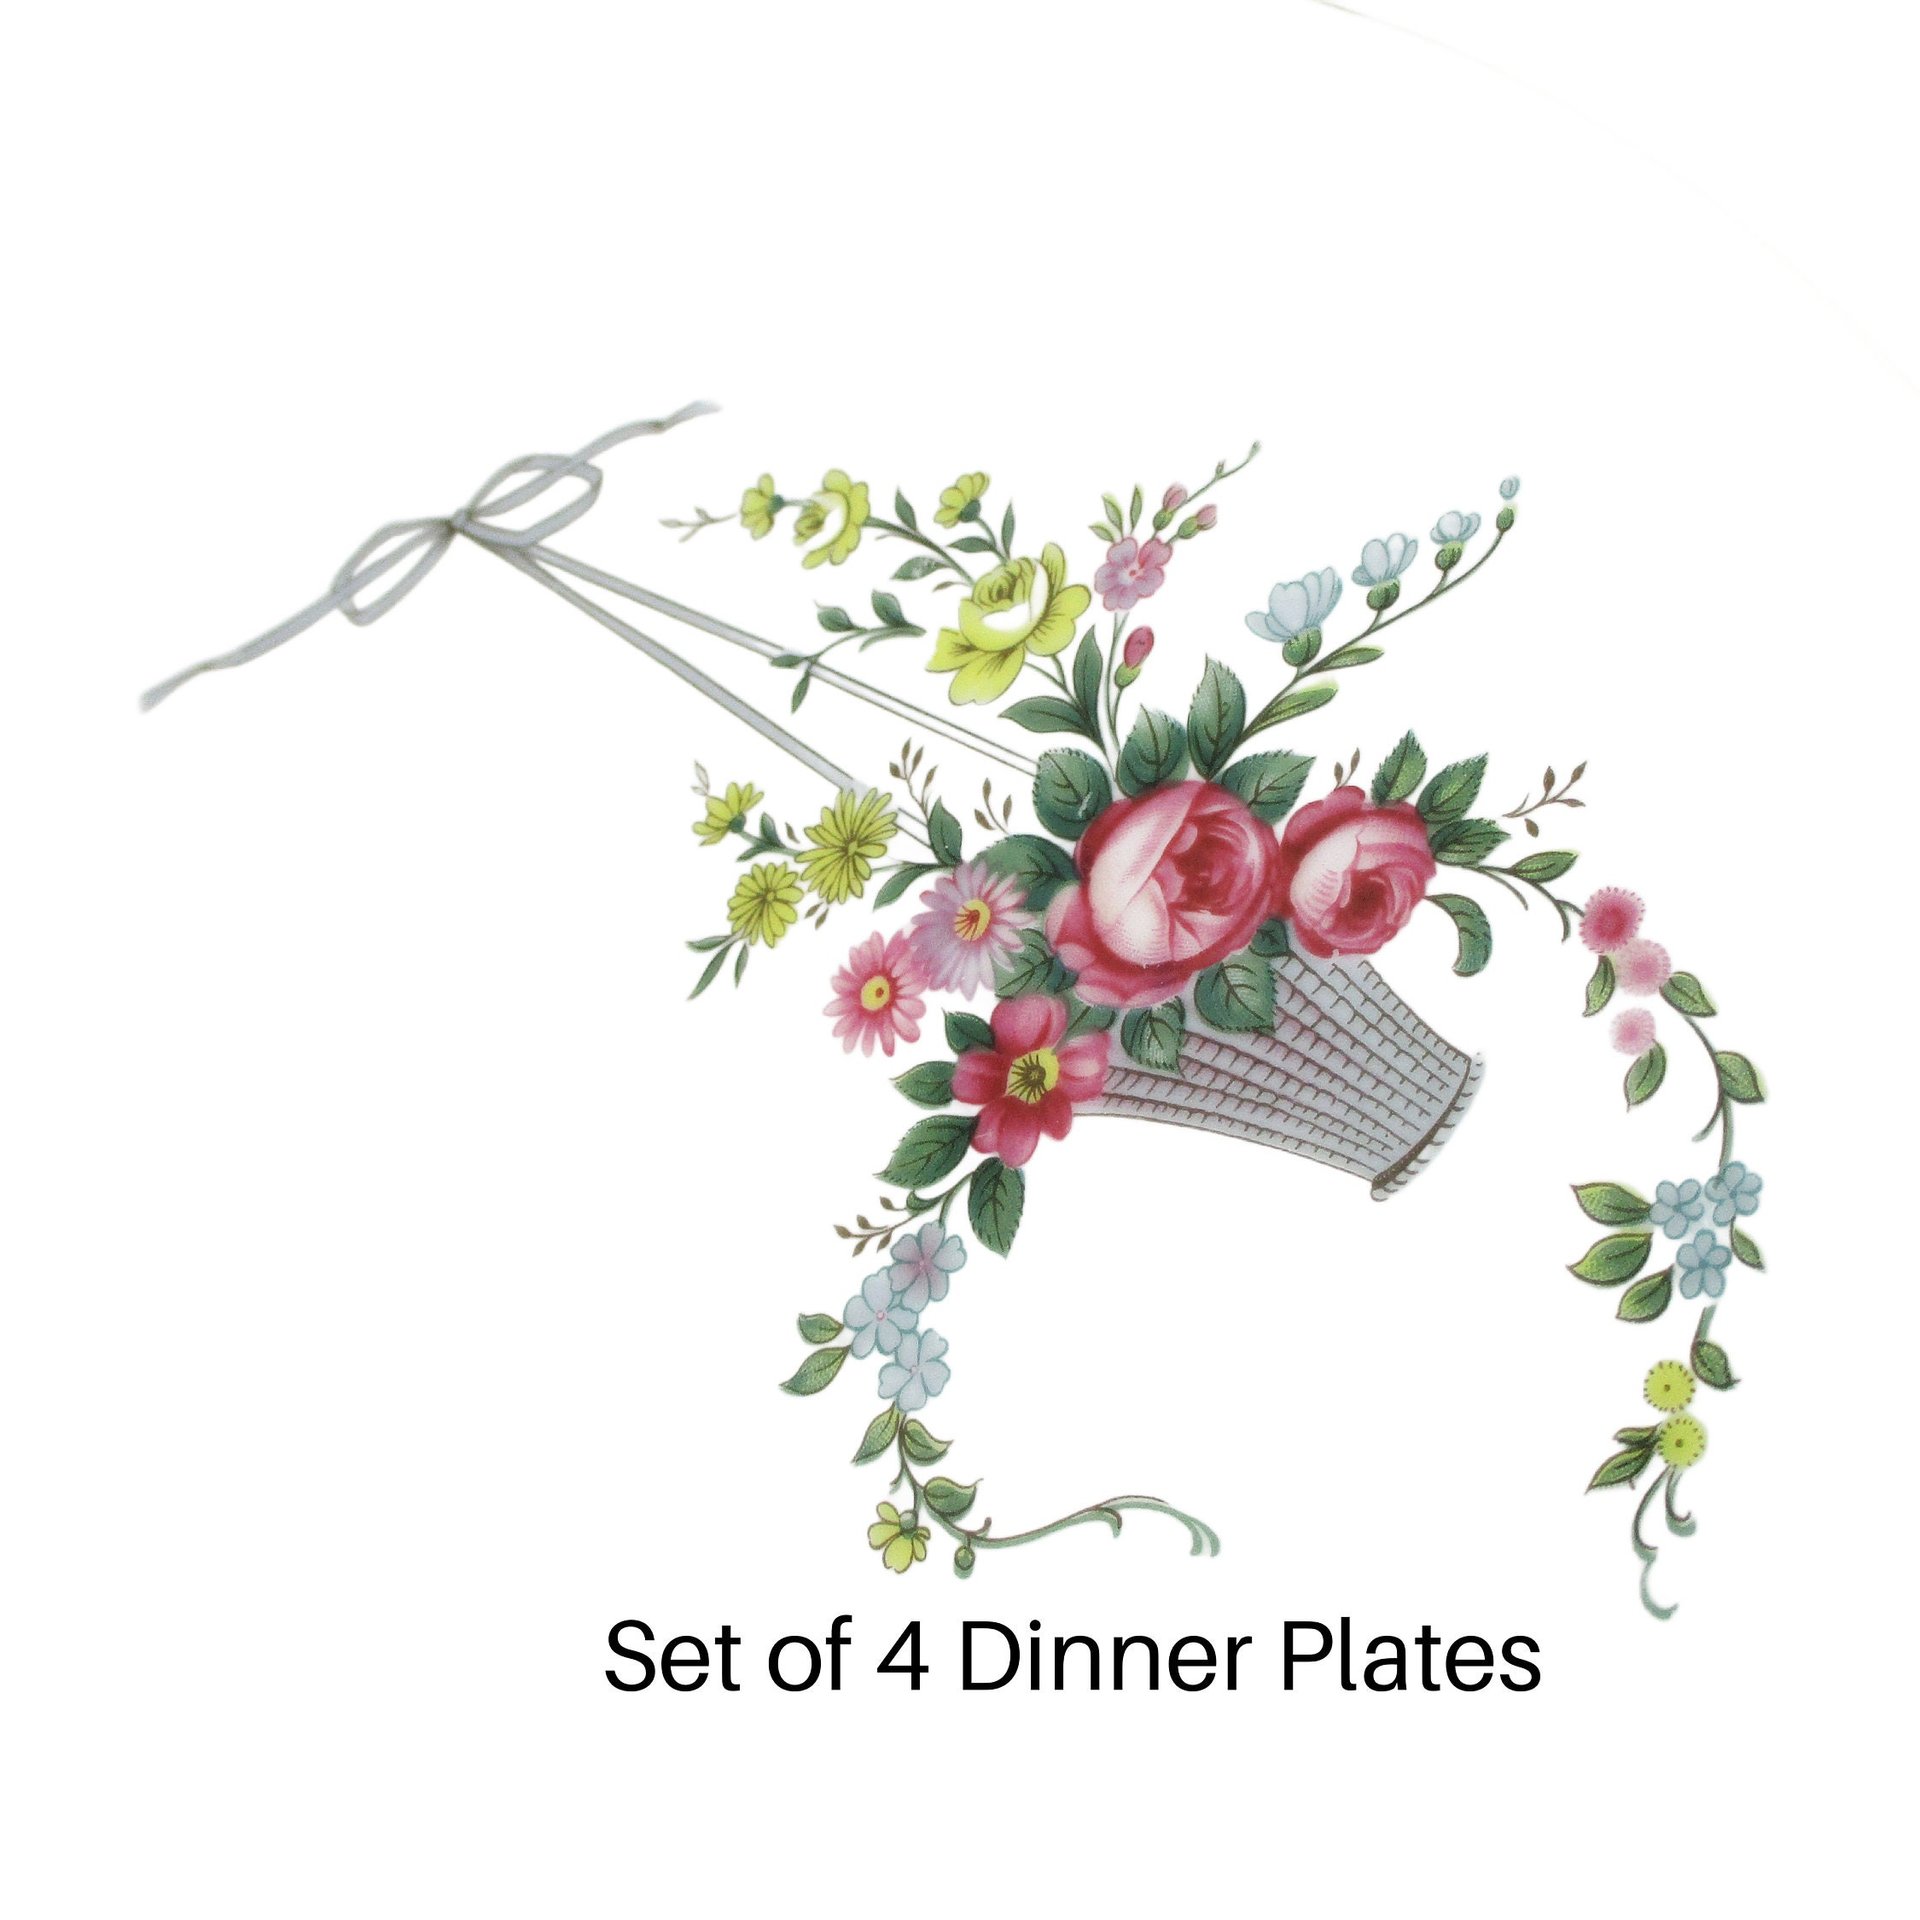 German Dinner Plates, Set of 4, Eschenbach Germany, Floral Hanging Baskets, Easter or Spring Tablescaping